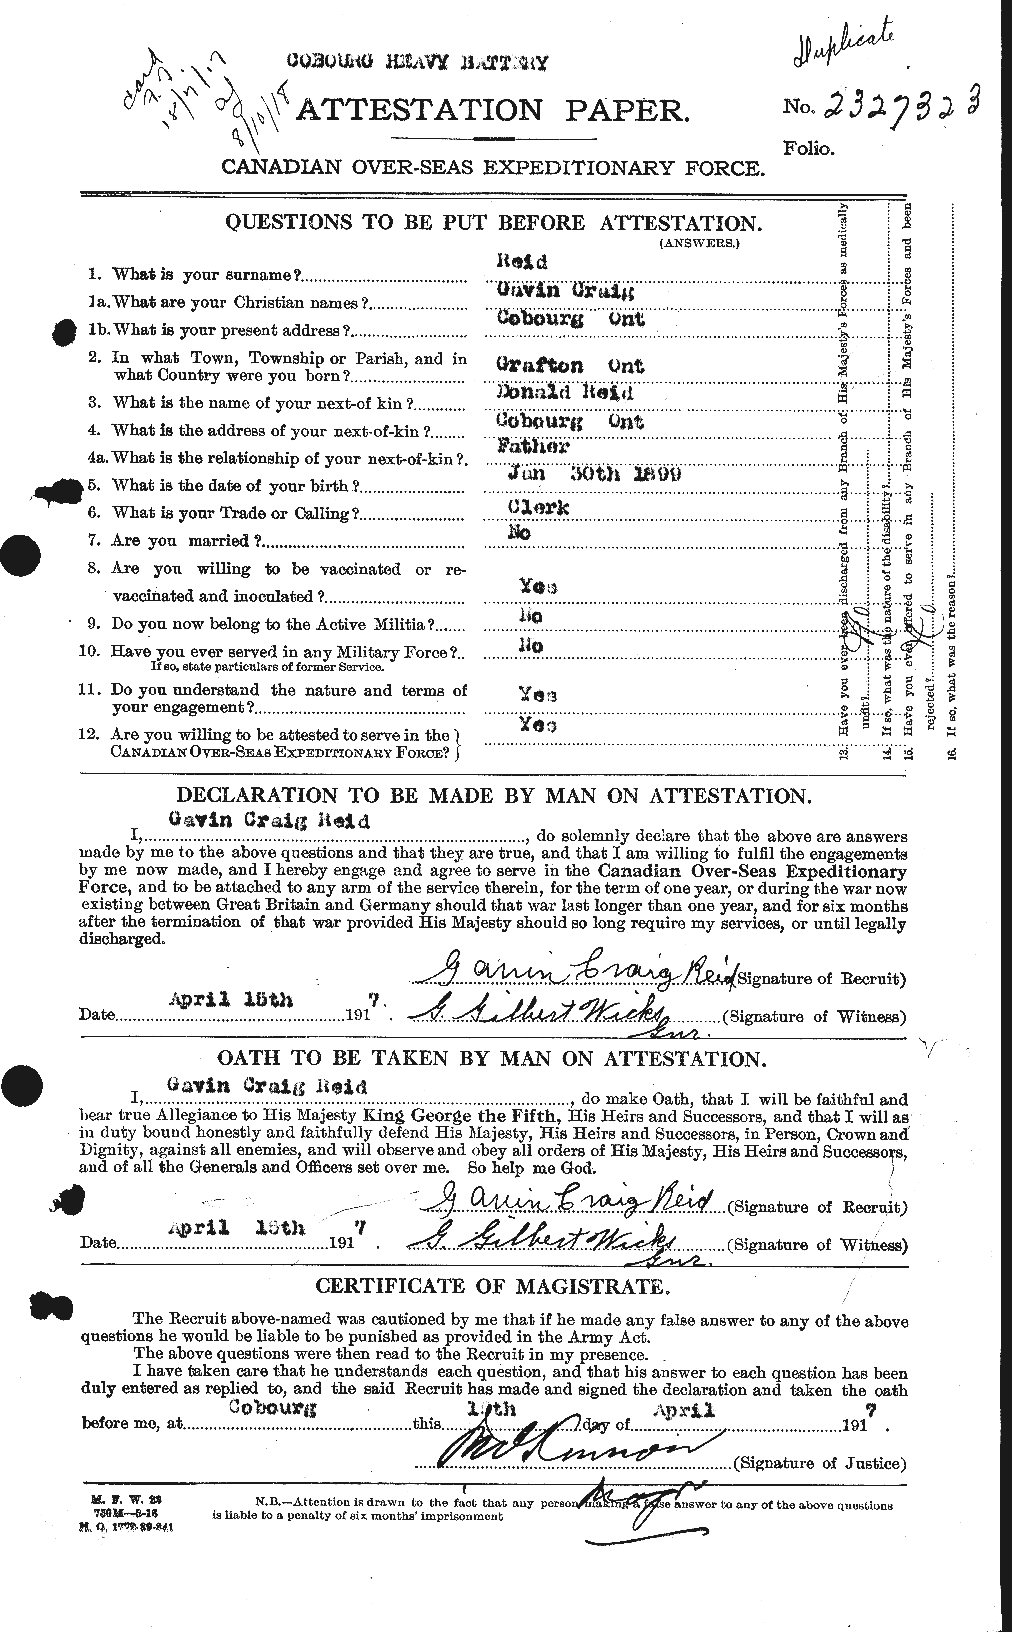 Personnel Records of the First World War - CEF 598078a